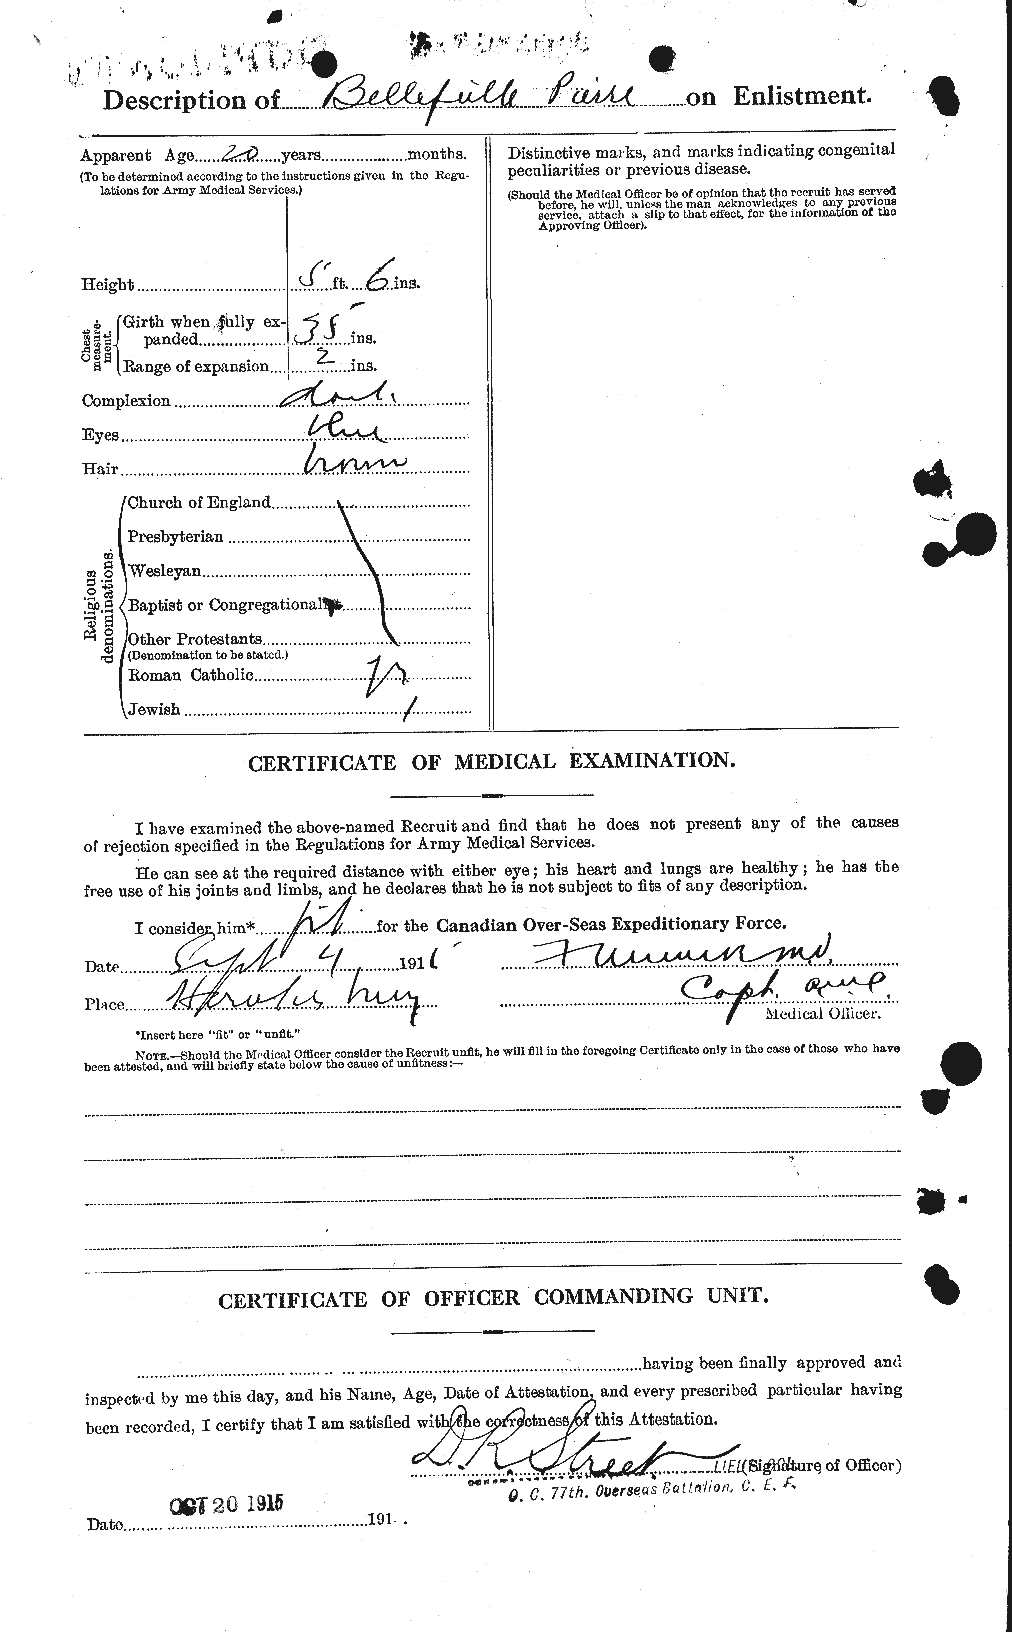 Personnel Records of the First World War - CEF 235071b